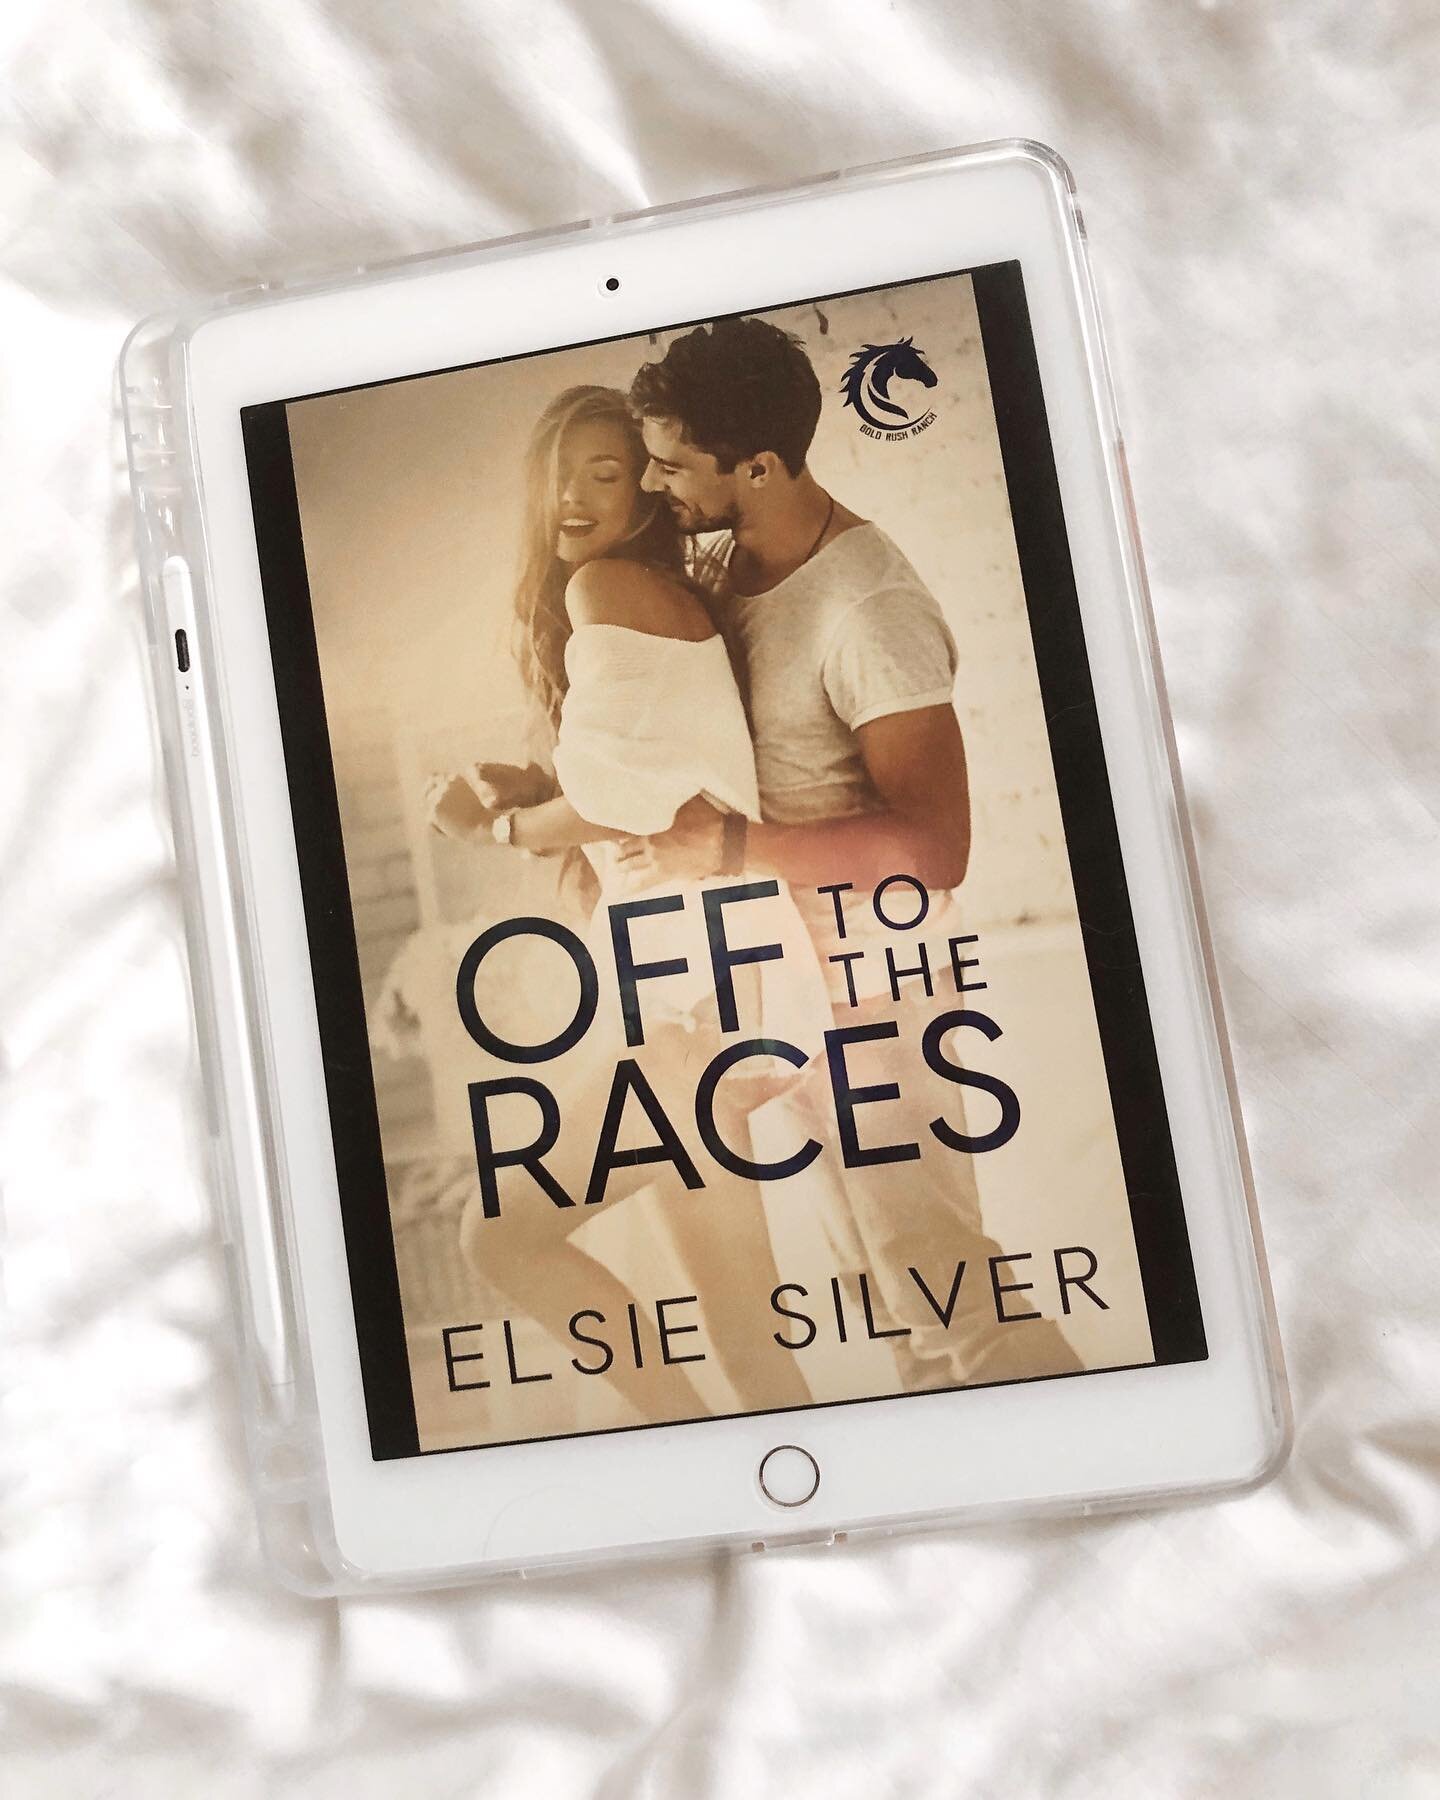 ✨ BOOK REVIEW ✨ 

📖 | 𝐨𝐟𝐟 𝐭𝐨 𝐭𝐡𝐞 𝐫𝐚𝐜𝐞𝐬
📝 | elsie silver &middot; @authorelsiesilver 
📅 | april 29, 2021
📚 | gold rush ranch, book # 1

rating : ⭐️⭐️⭐️.5
spice : 🌶️🌶️.5 

👍🏼 | First and foremost, I liked that it was a &ldquo;diffe